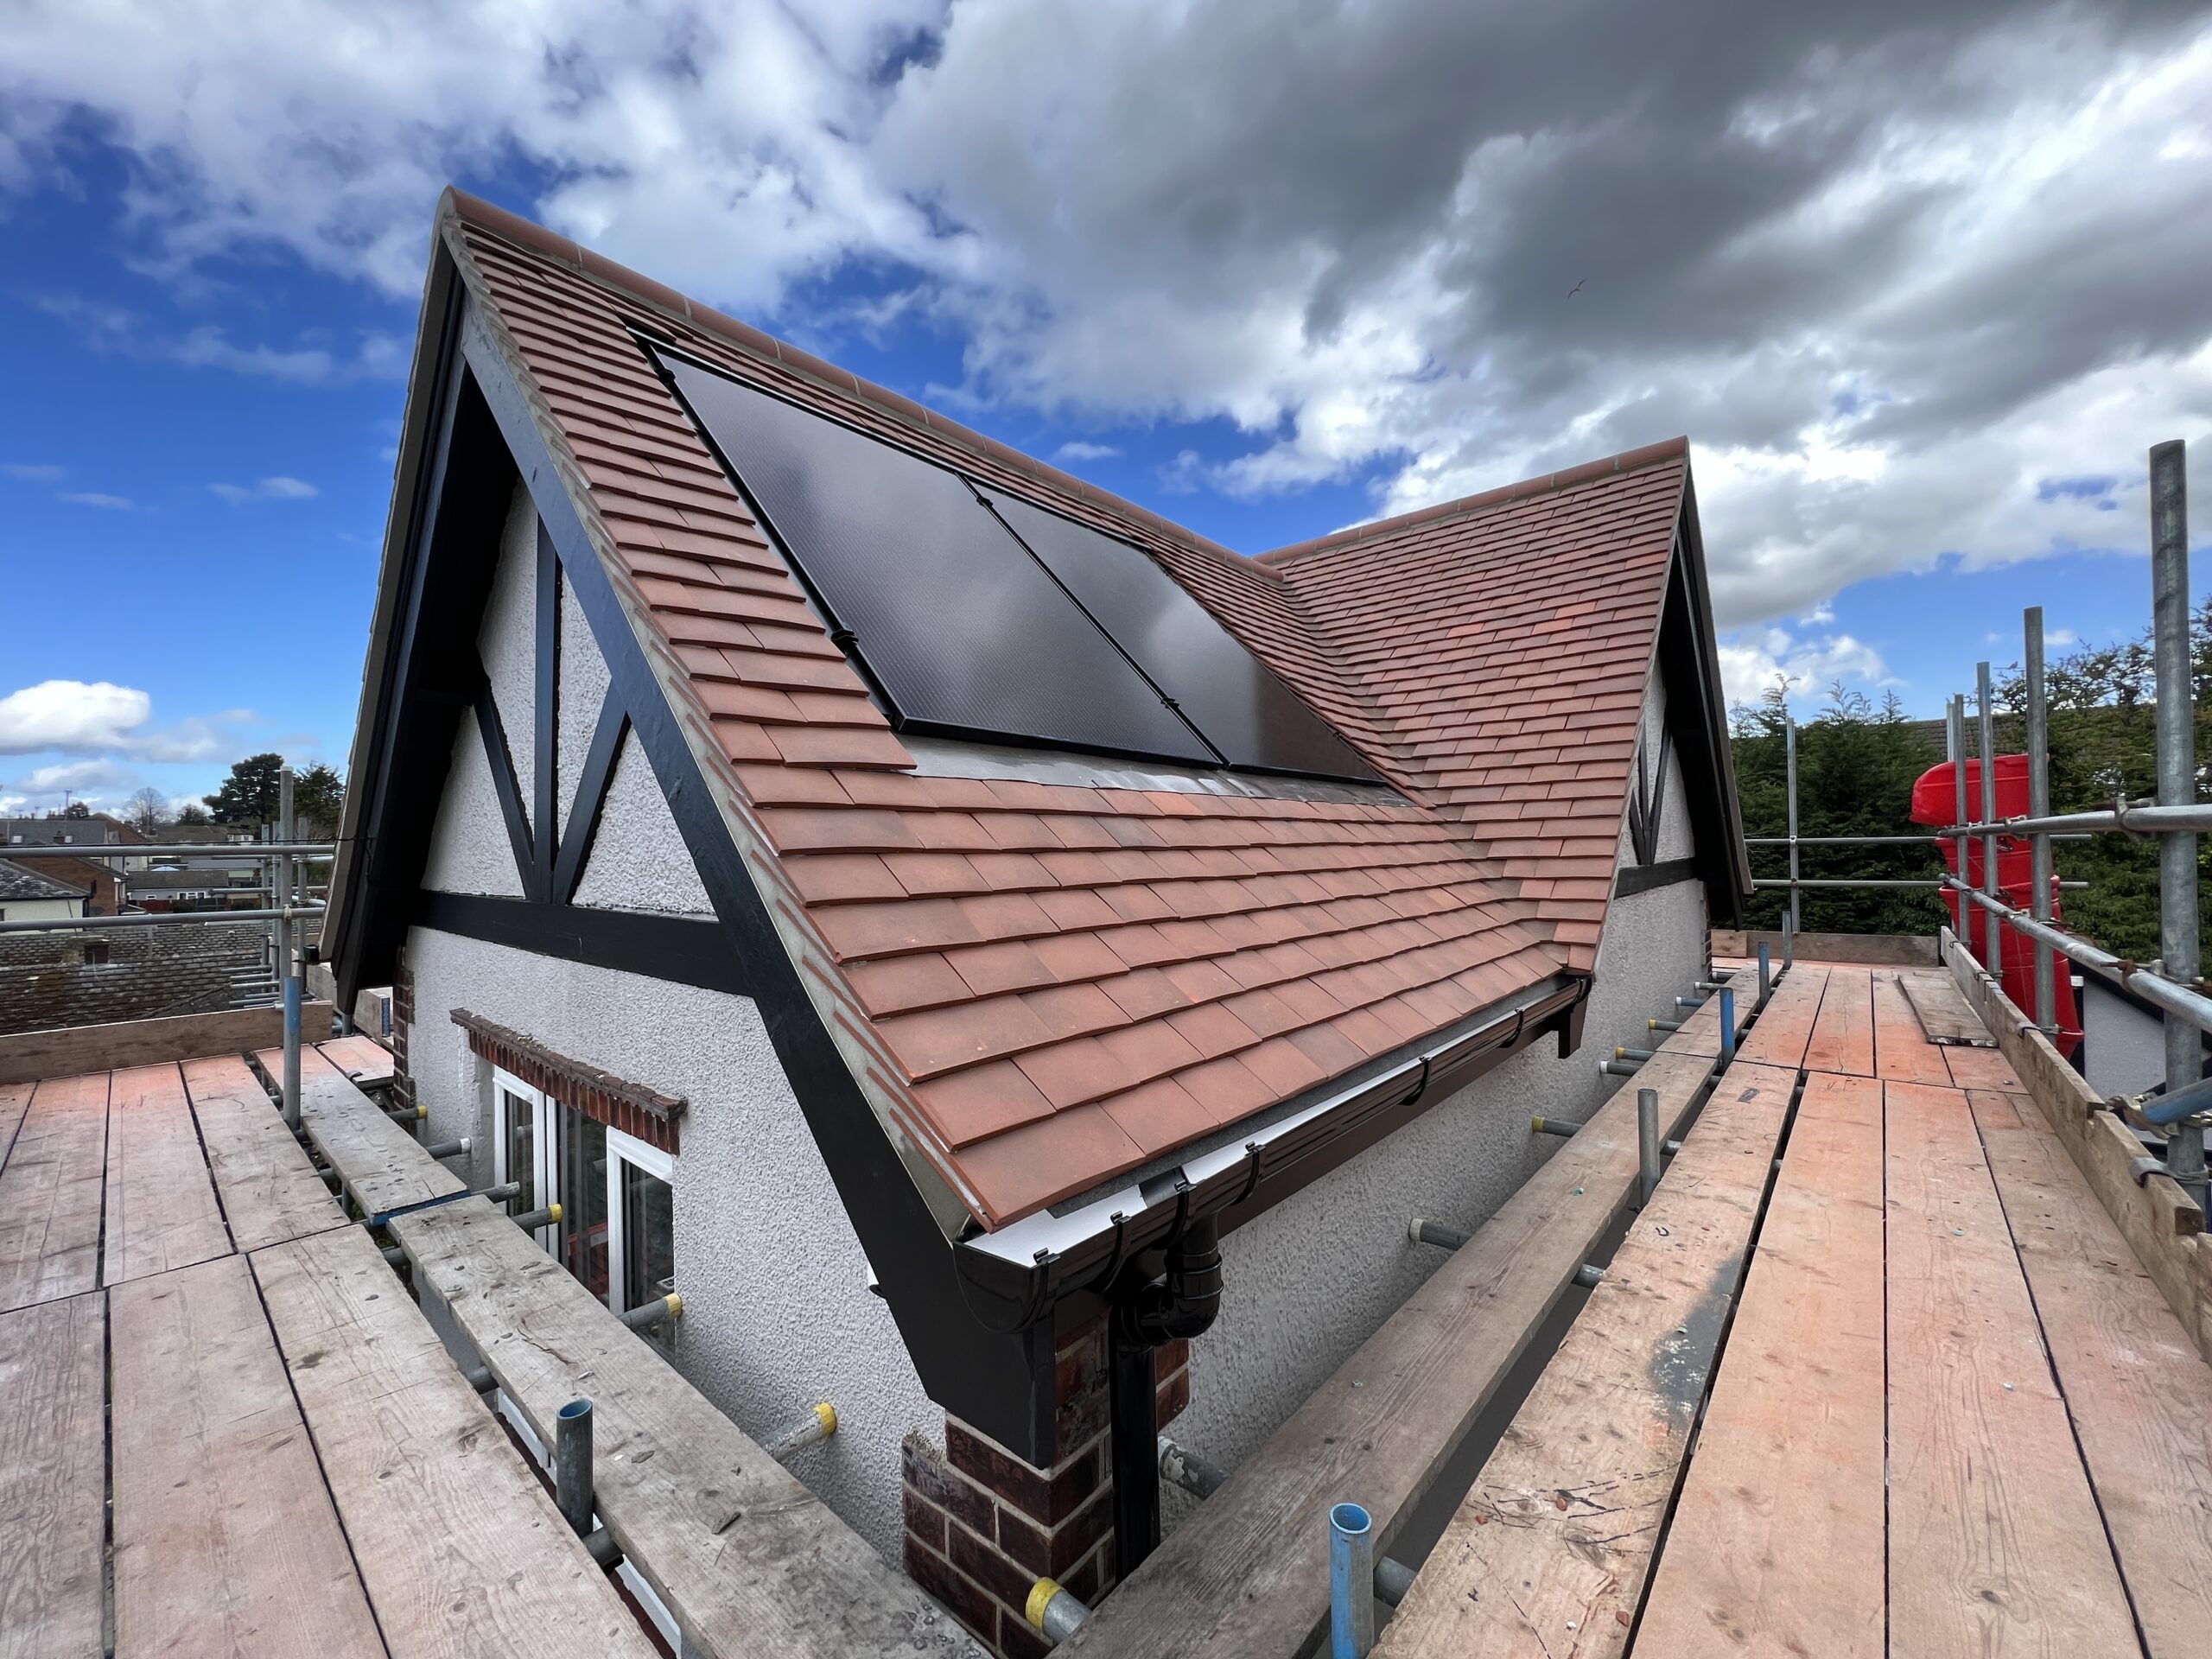 Solar PV – In roof system, Colchester City